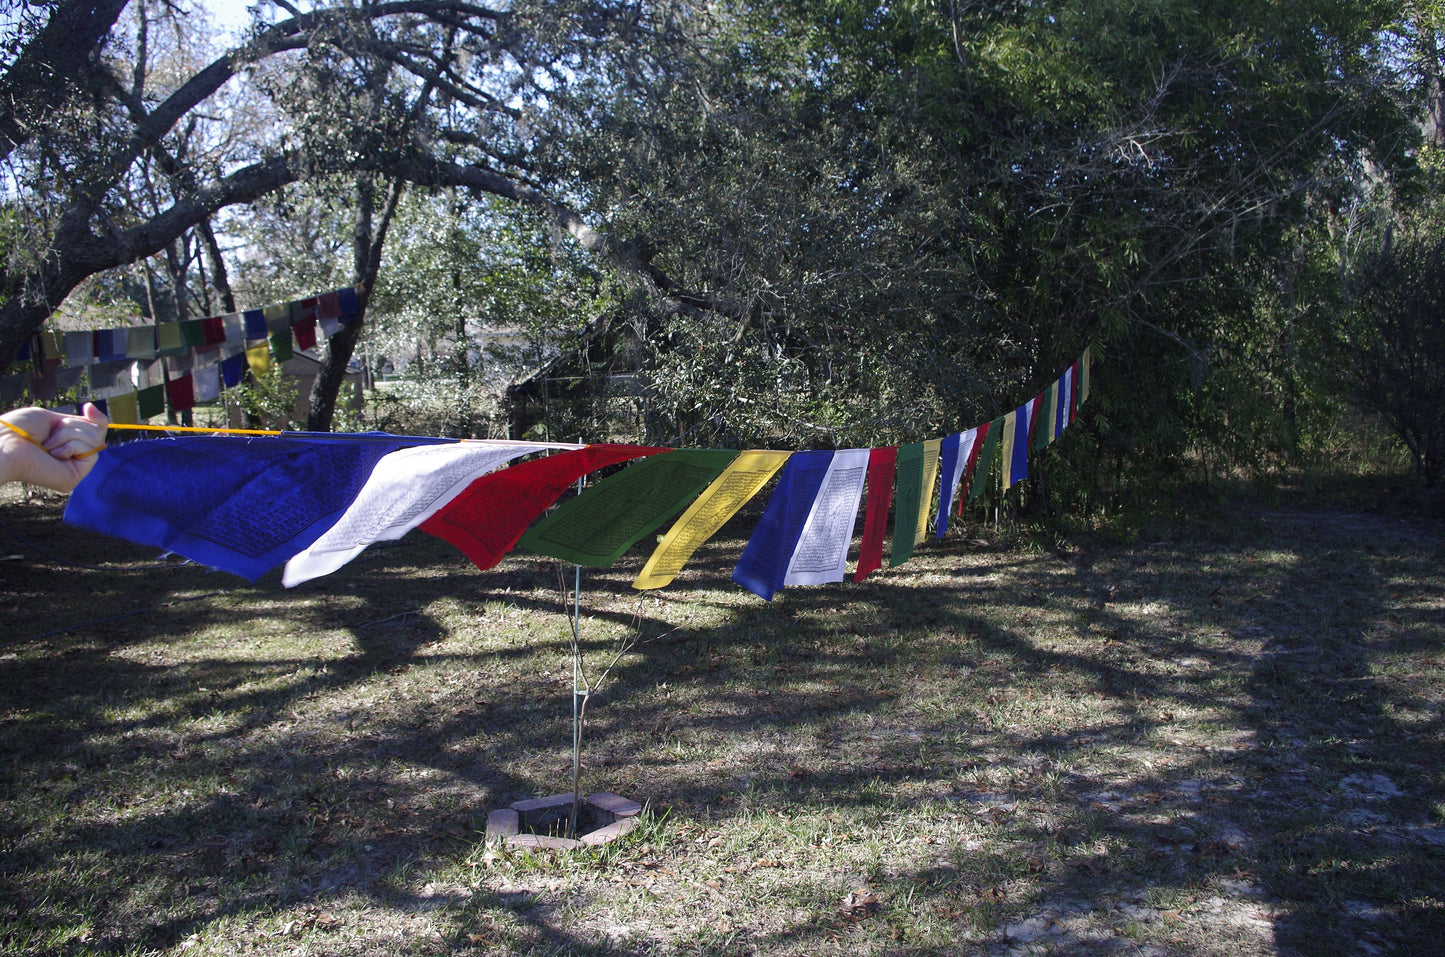 A strand of 25 Chenrezig prayer flags in 5 colors, each 14x17 inches, depicting the Buddha of Compassion hanging outdoors.